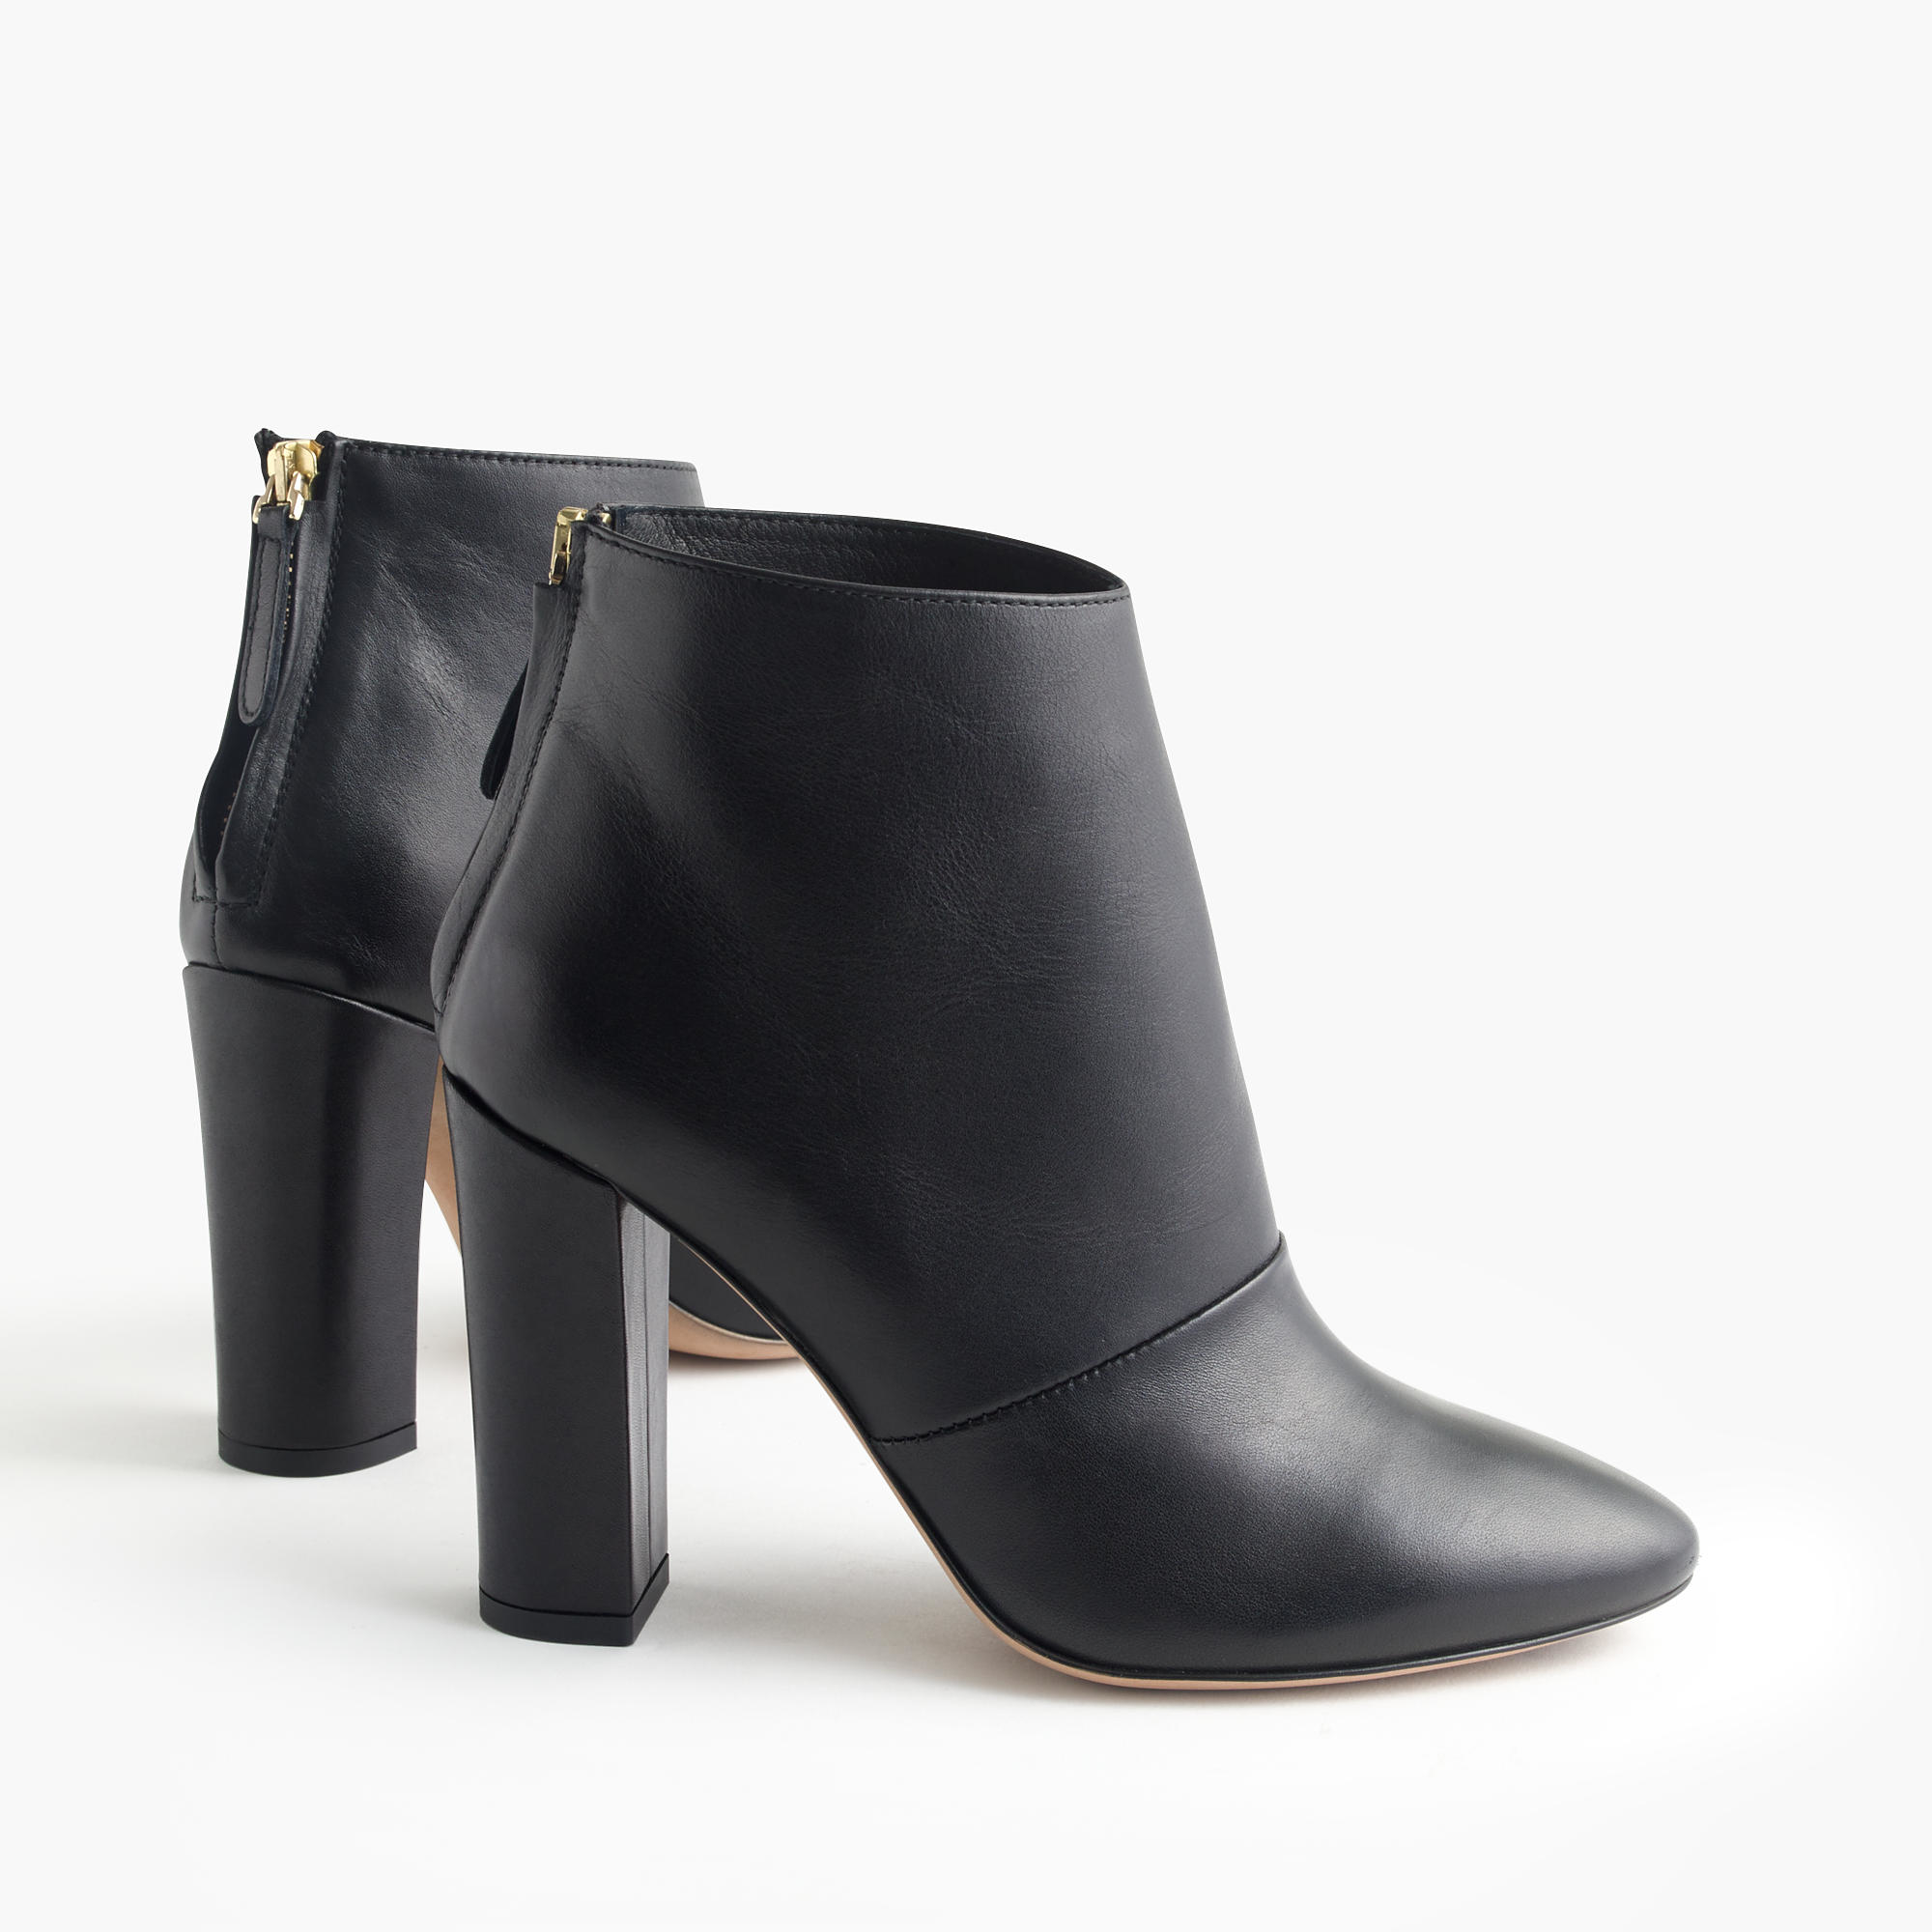 Lyst - J.Crew Adele Ankle Boots in Black